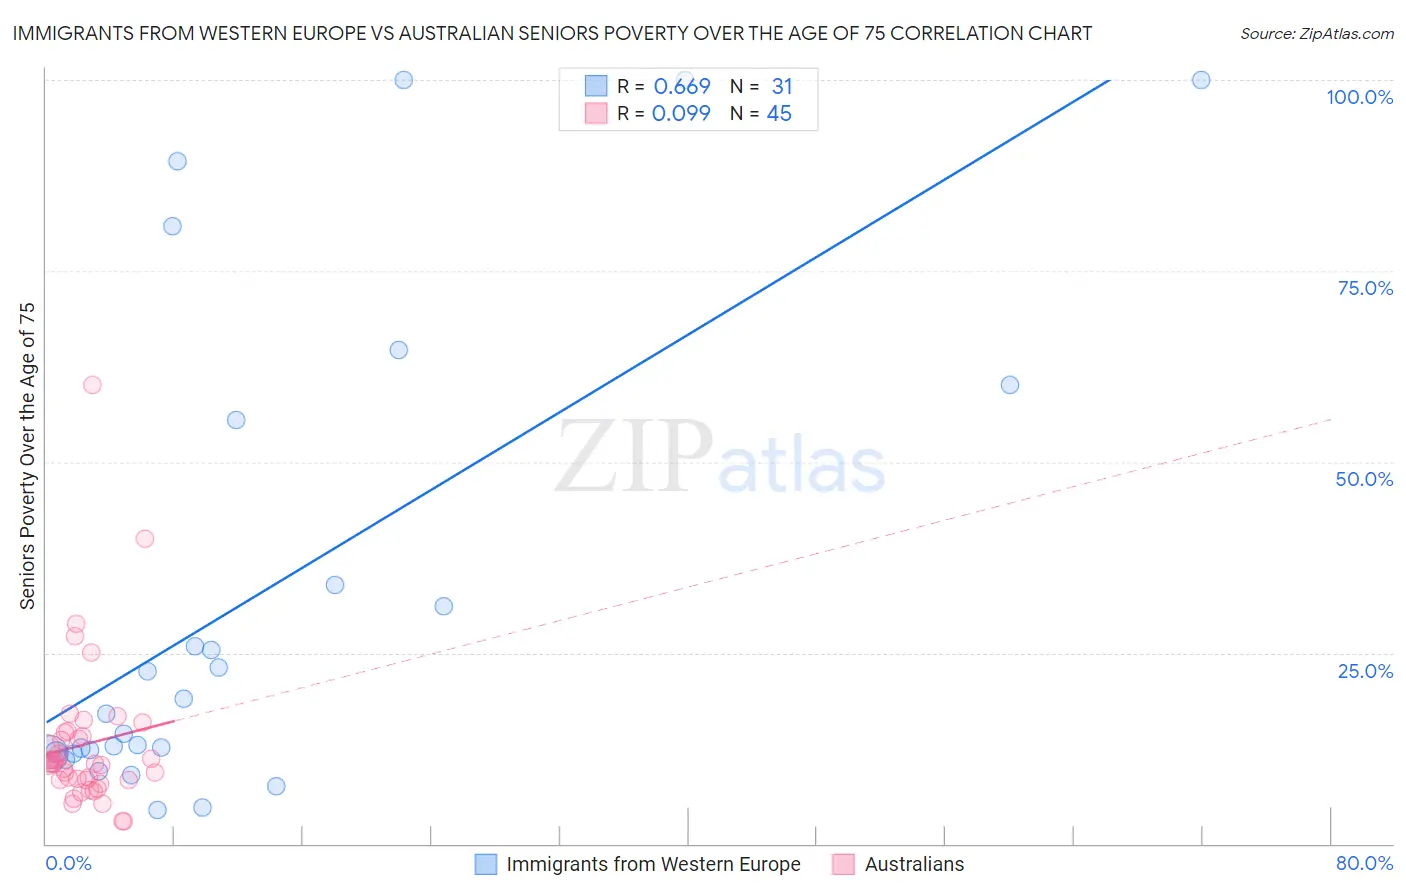 Immigrants from Western Europe vs Australian Seniors Poverty Over the Age of 75